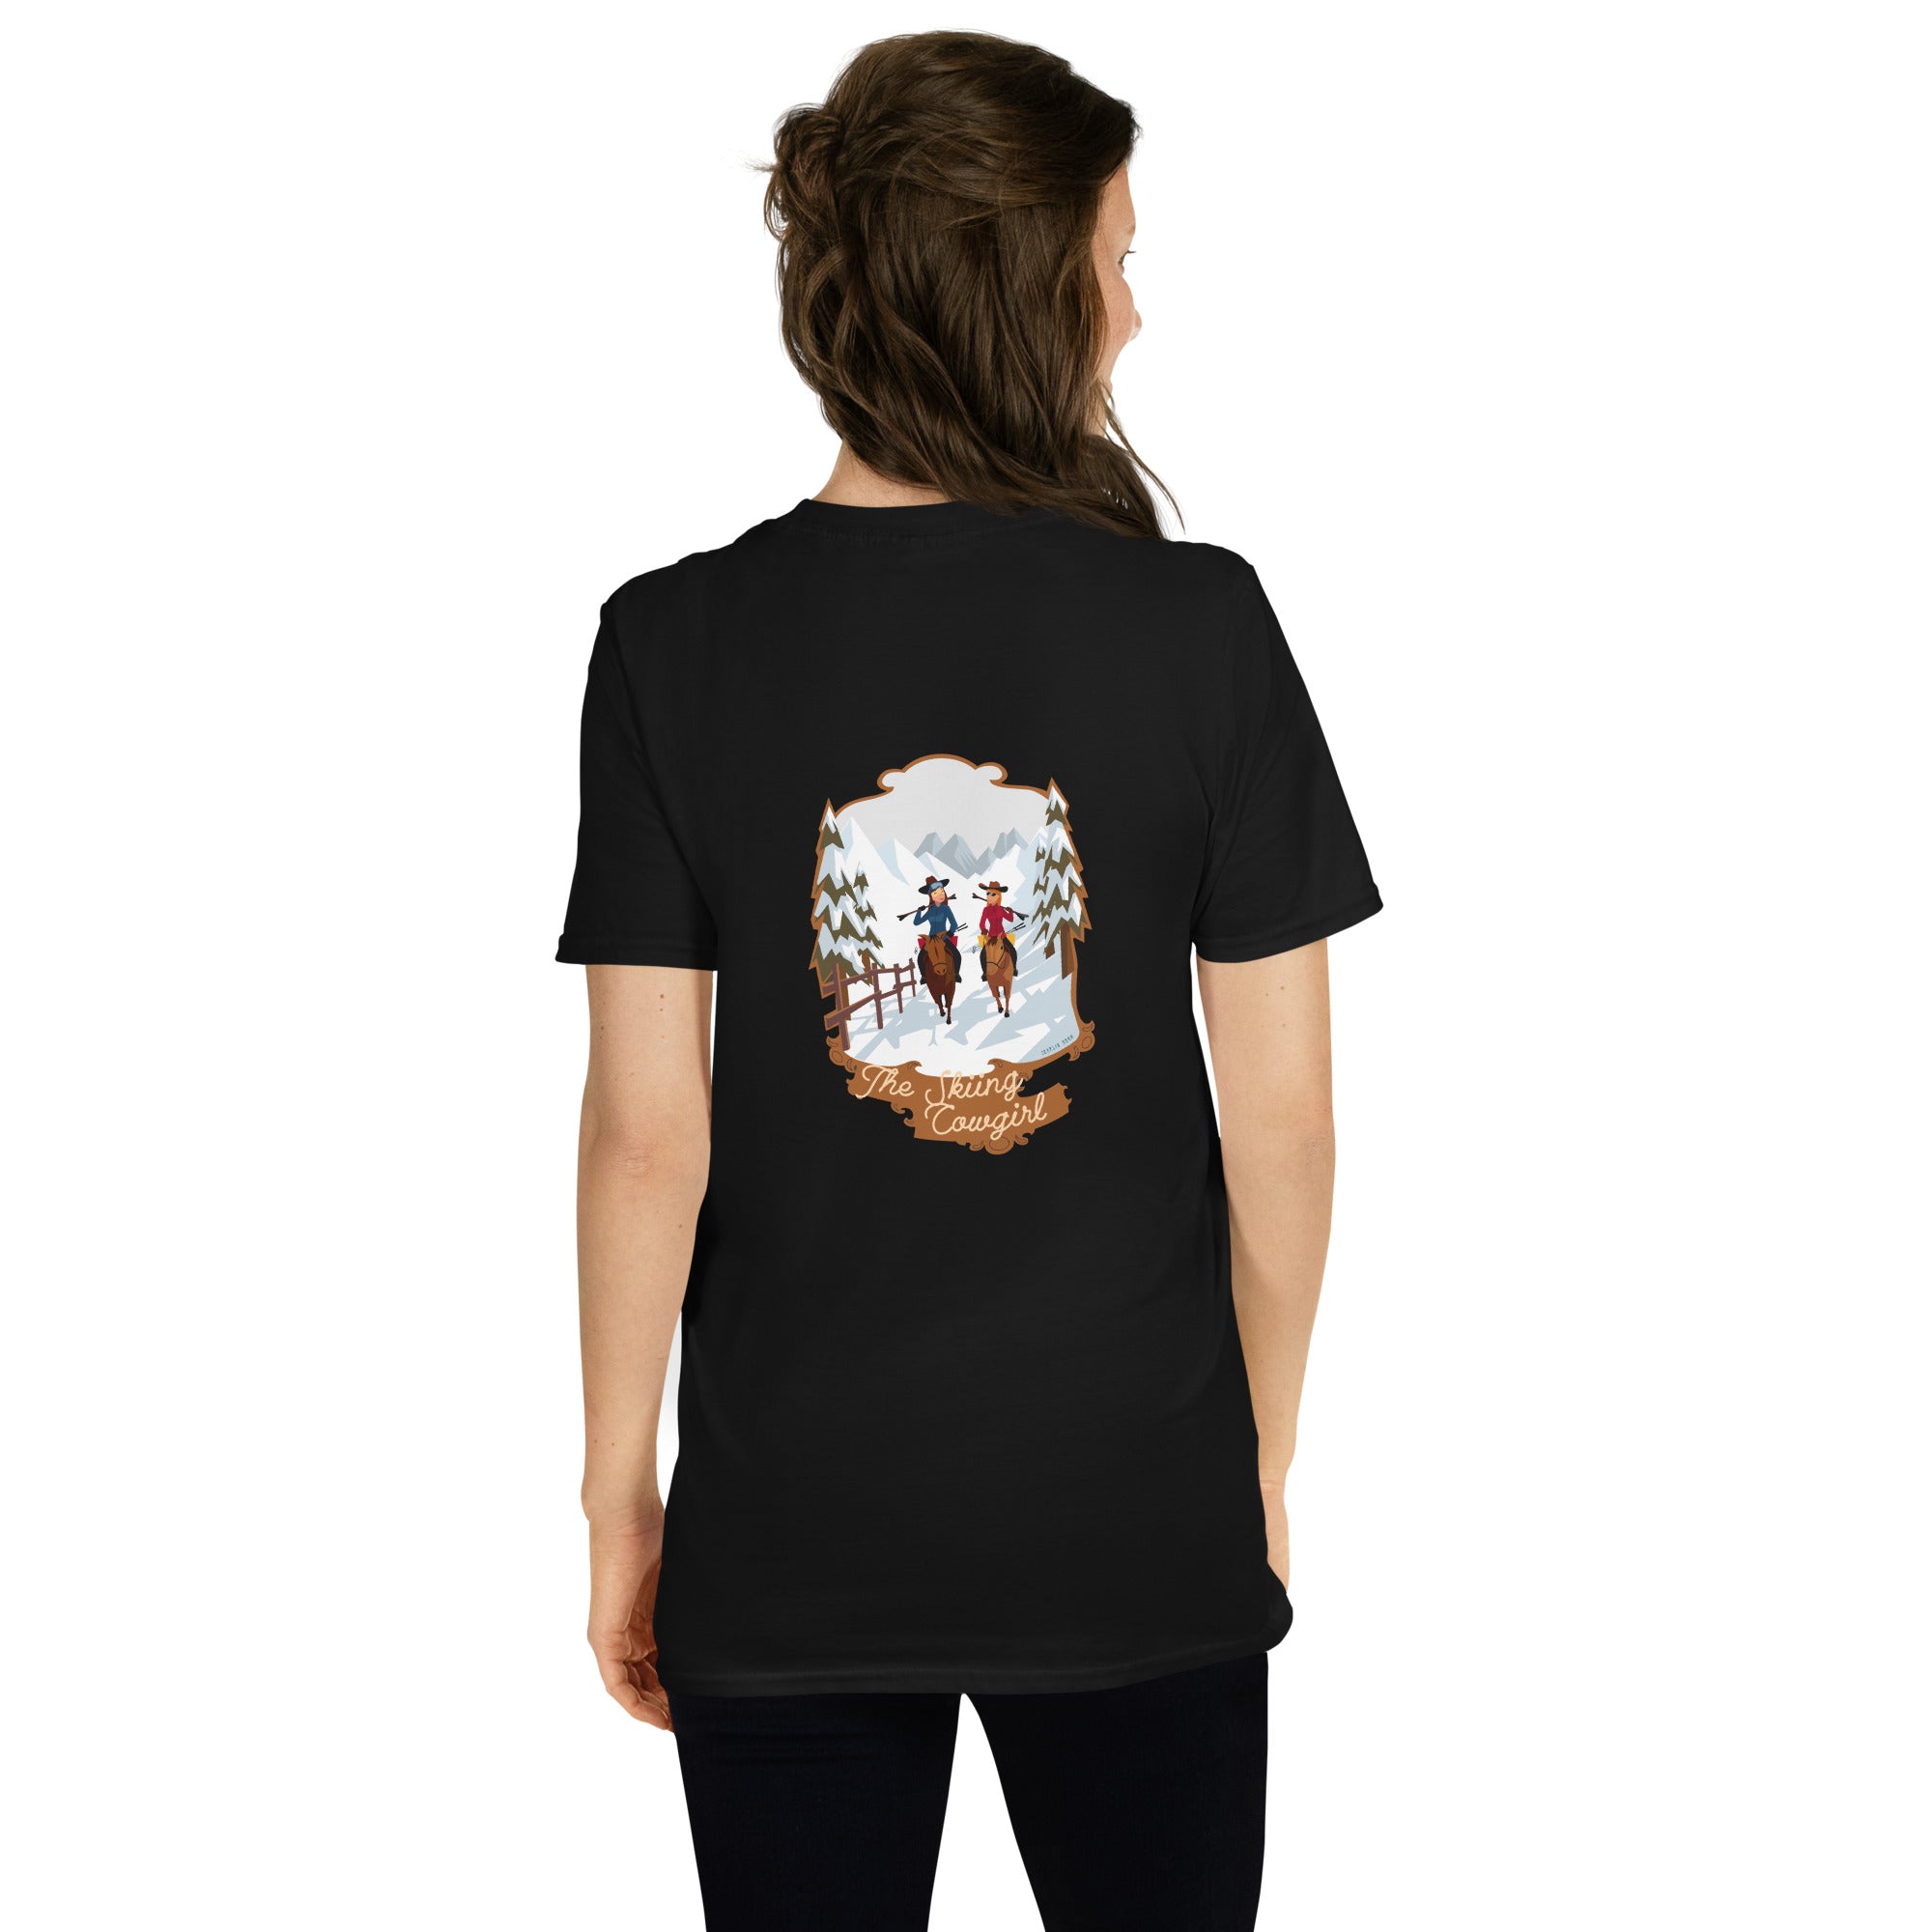 Softstyle Cotton T-Shirt The Skiing Cowgirl